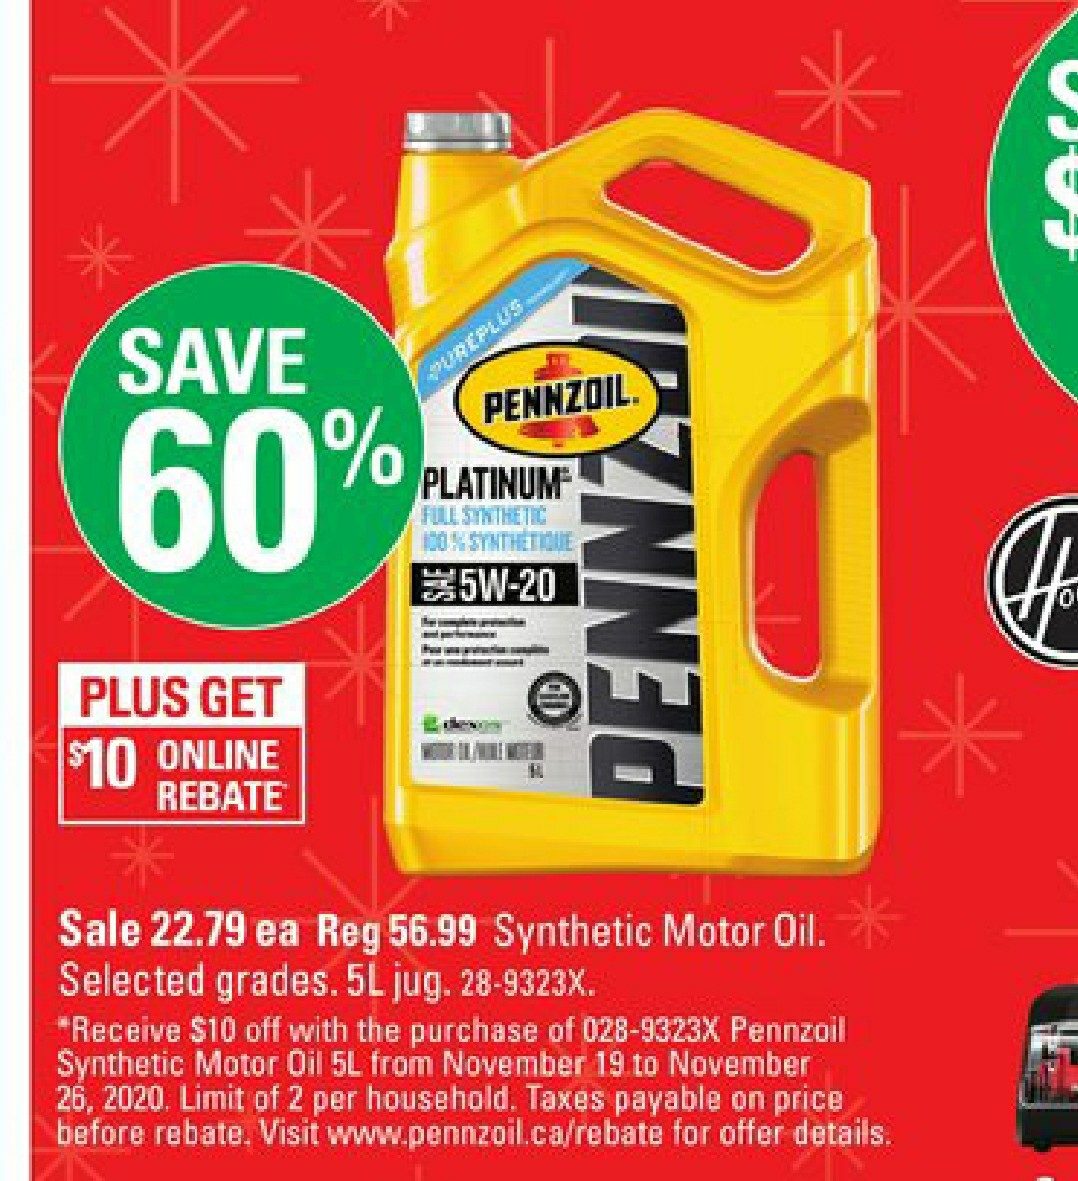  Canadian Tire Expired Pennzoil For 22 79 Plus Rebate Up To 20 